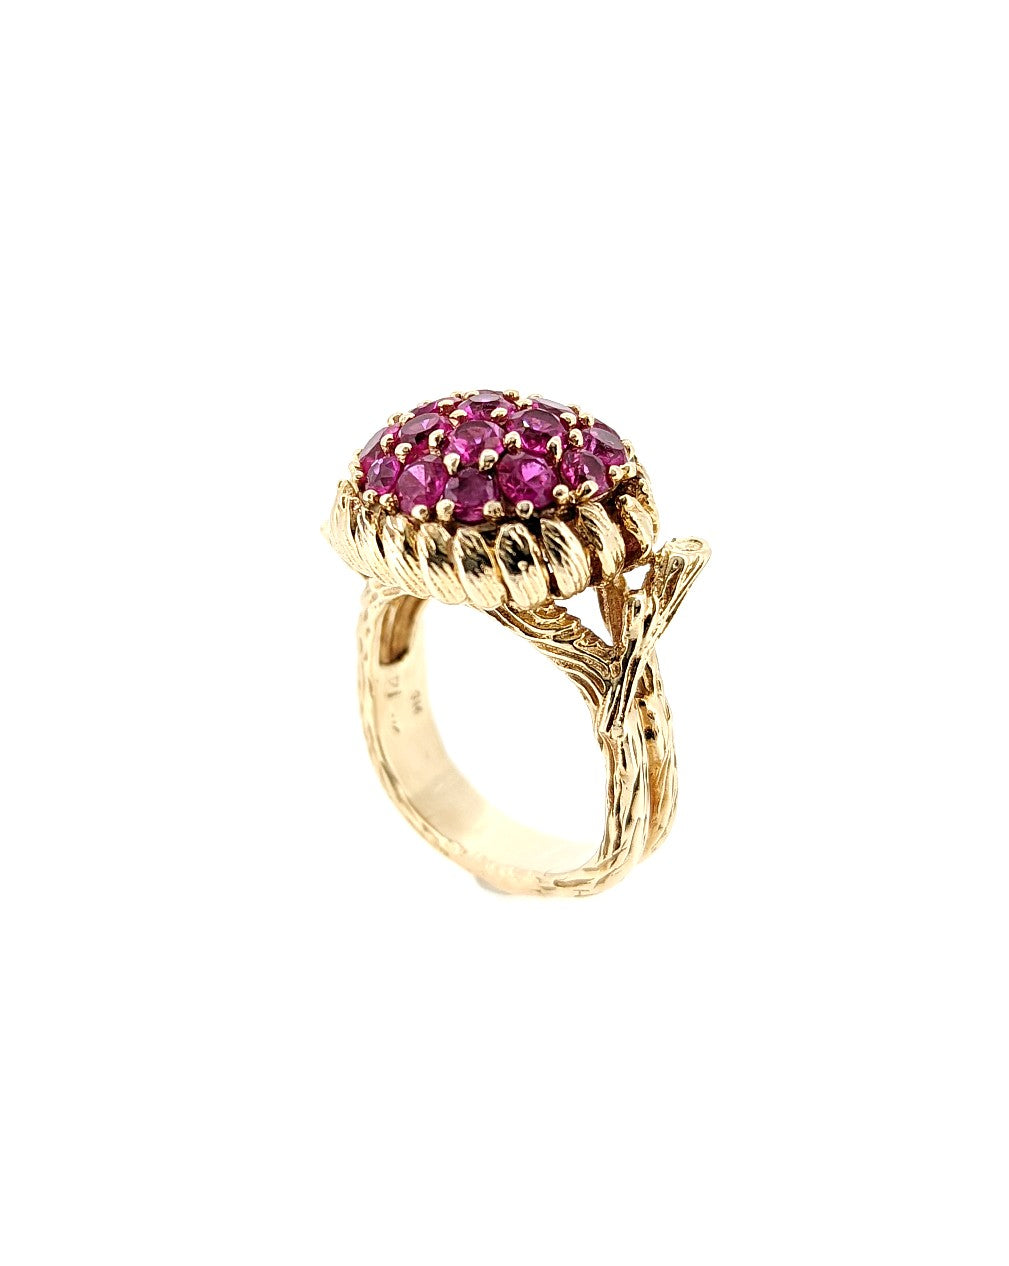 Vintage Ruby Cluster Ring in 14K Yellow Gold